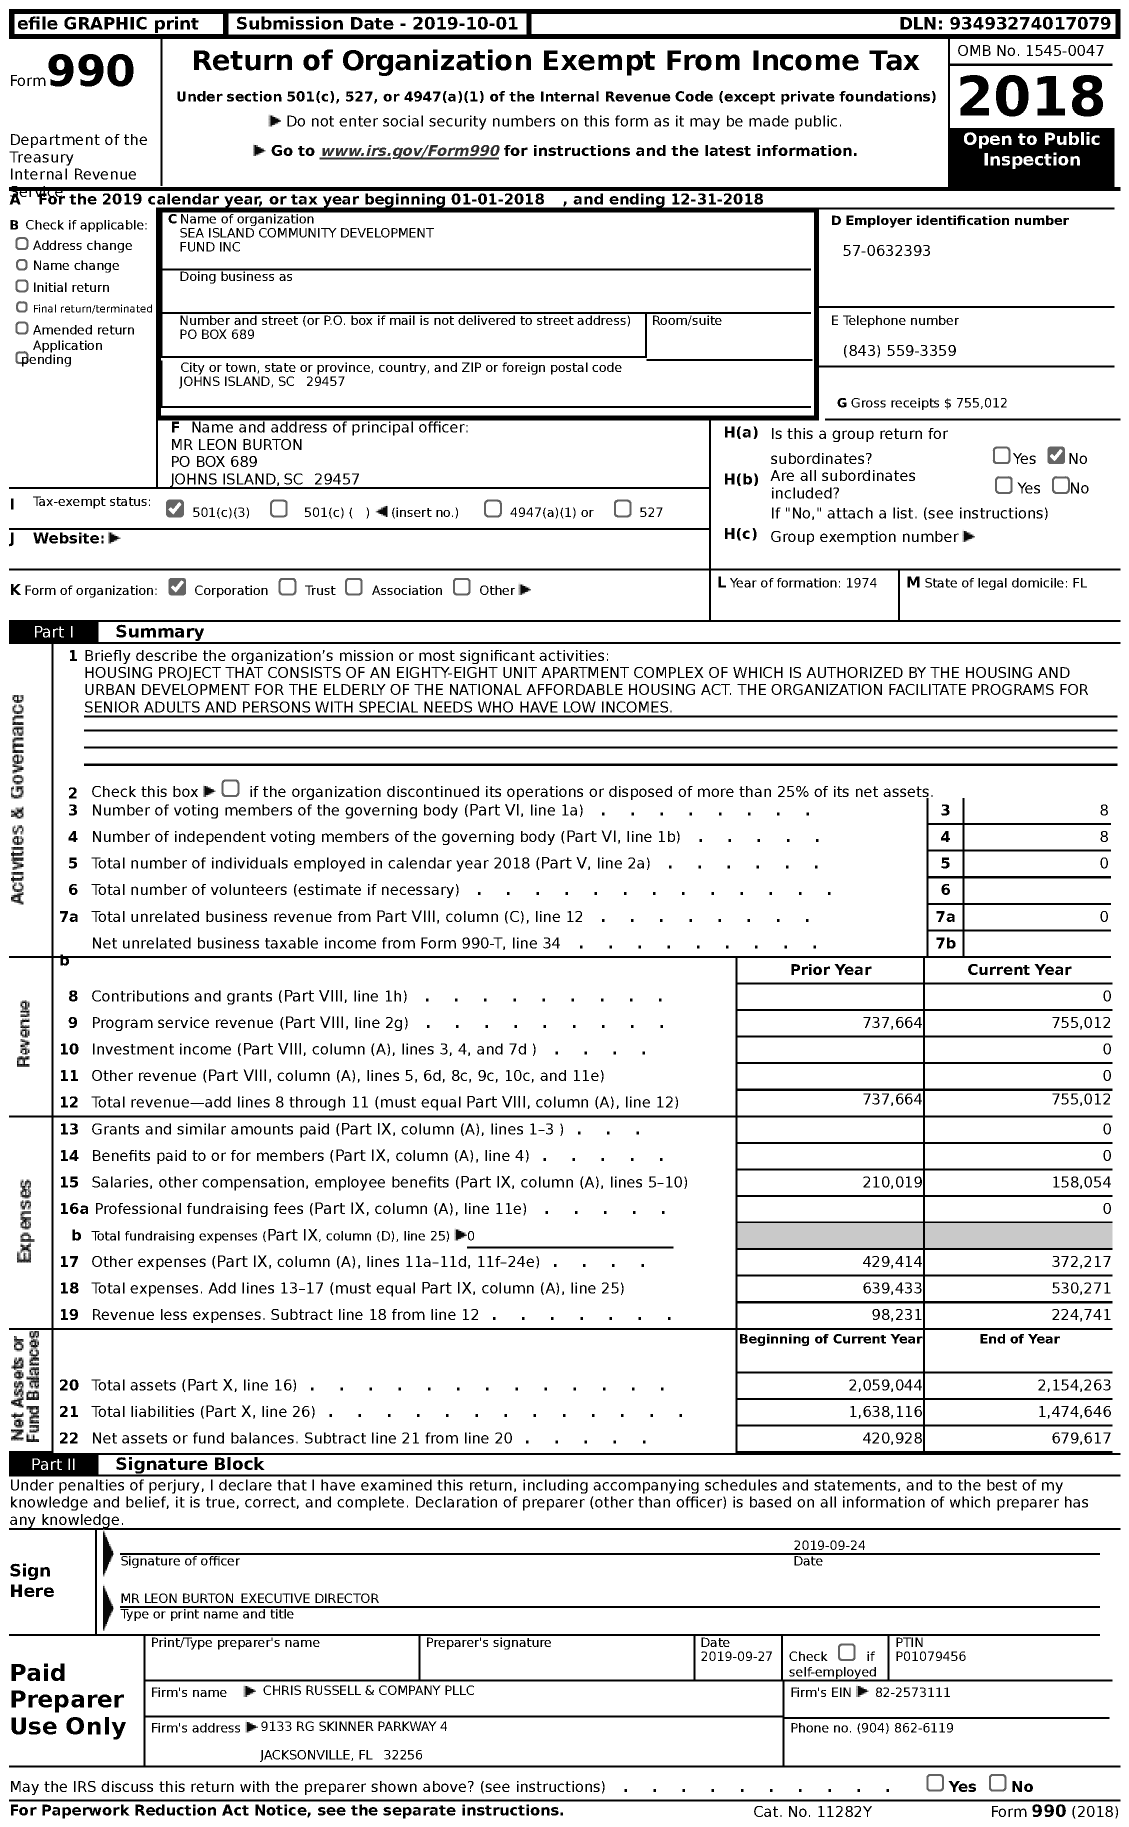 Image of first page of 2018 Form 990 for Sea Island Community Development Fund